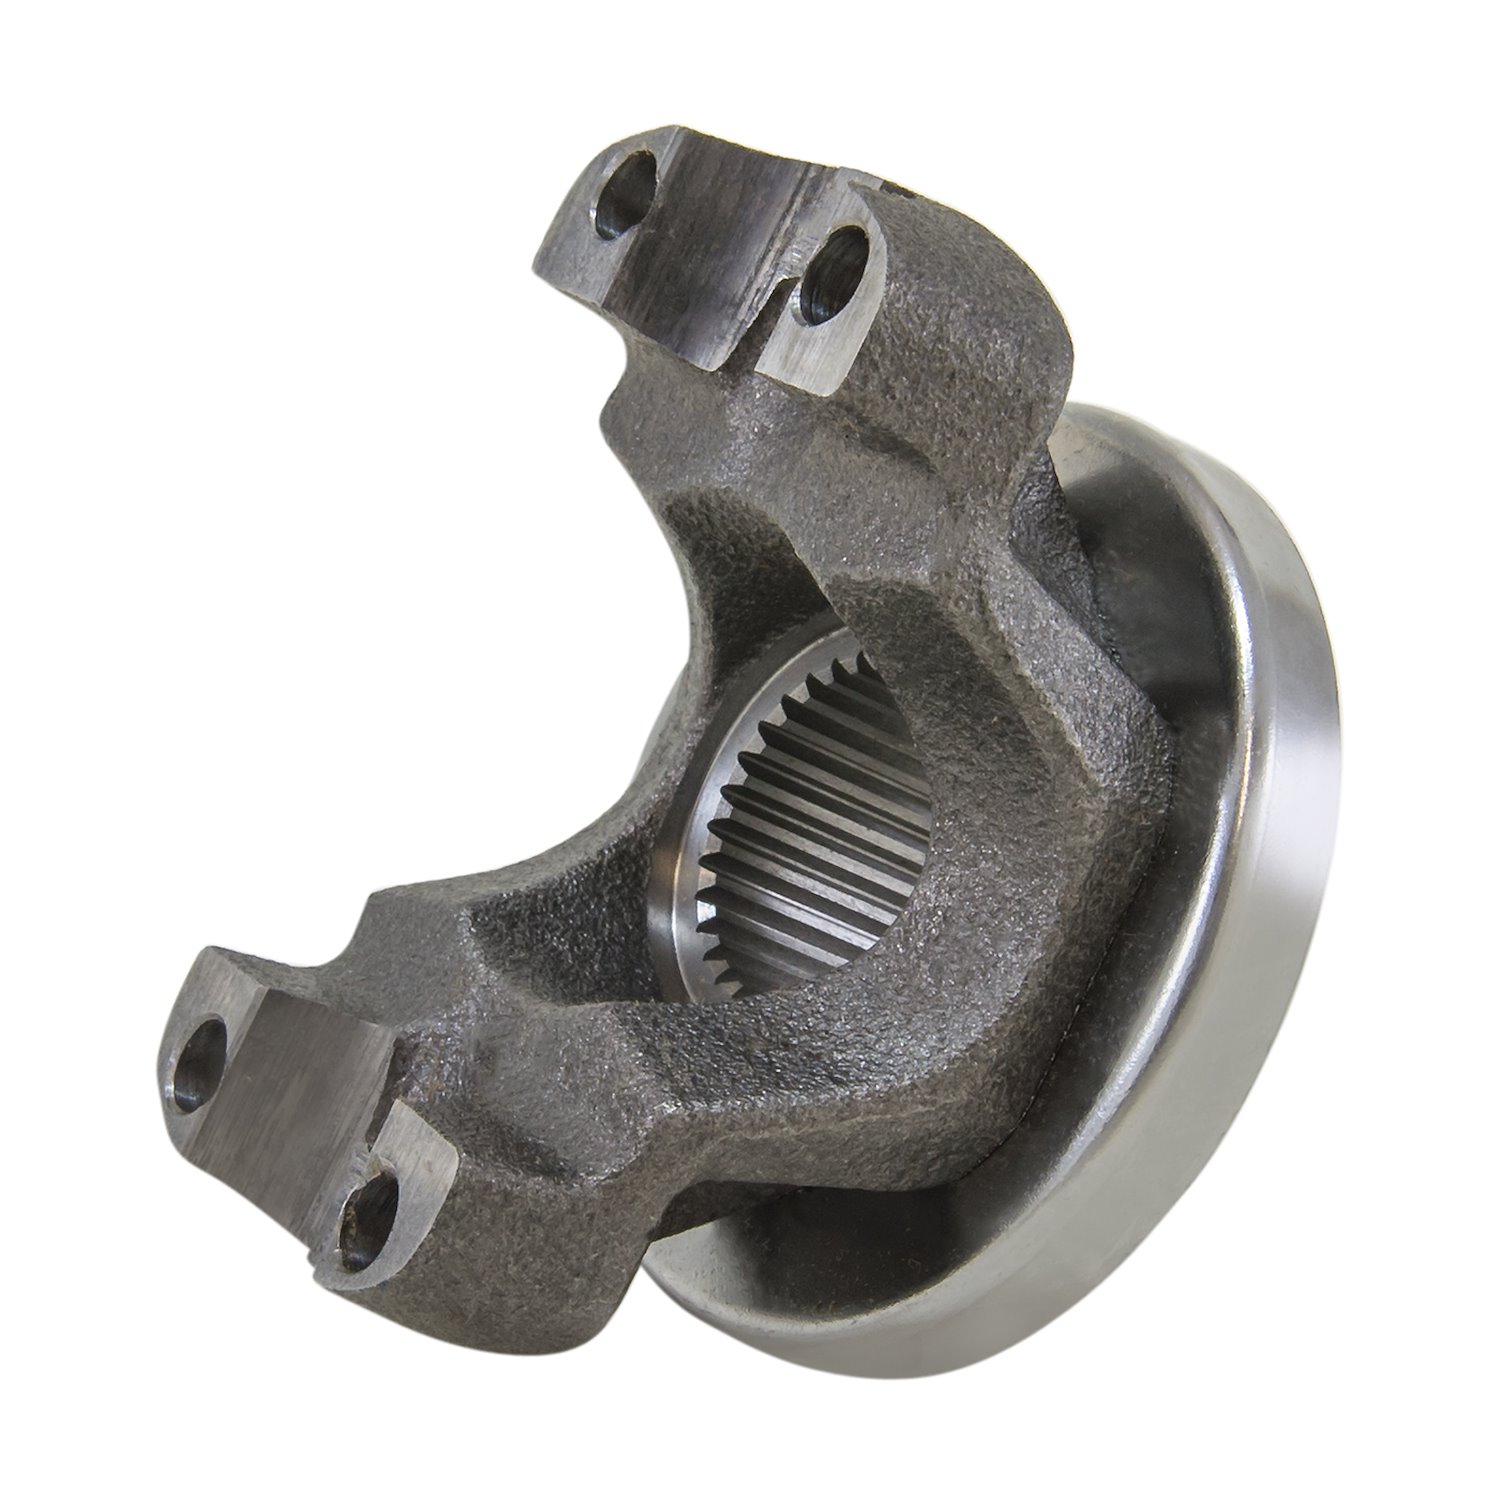 Yukon new end yoke with 35 spline and a 1480 U/Joint size